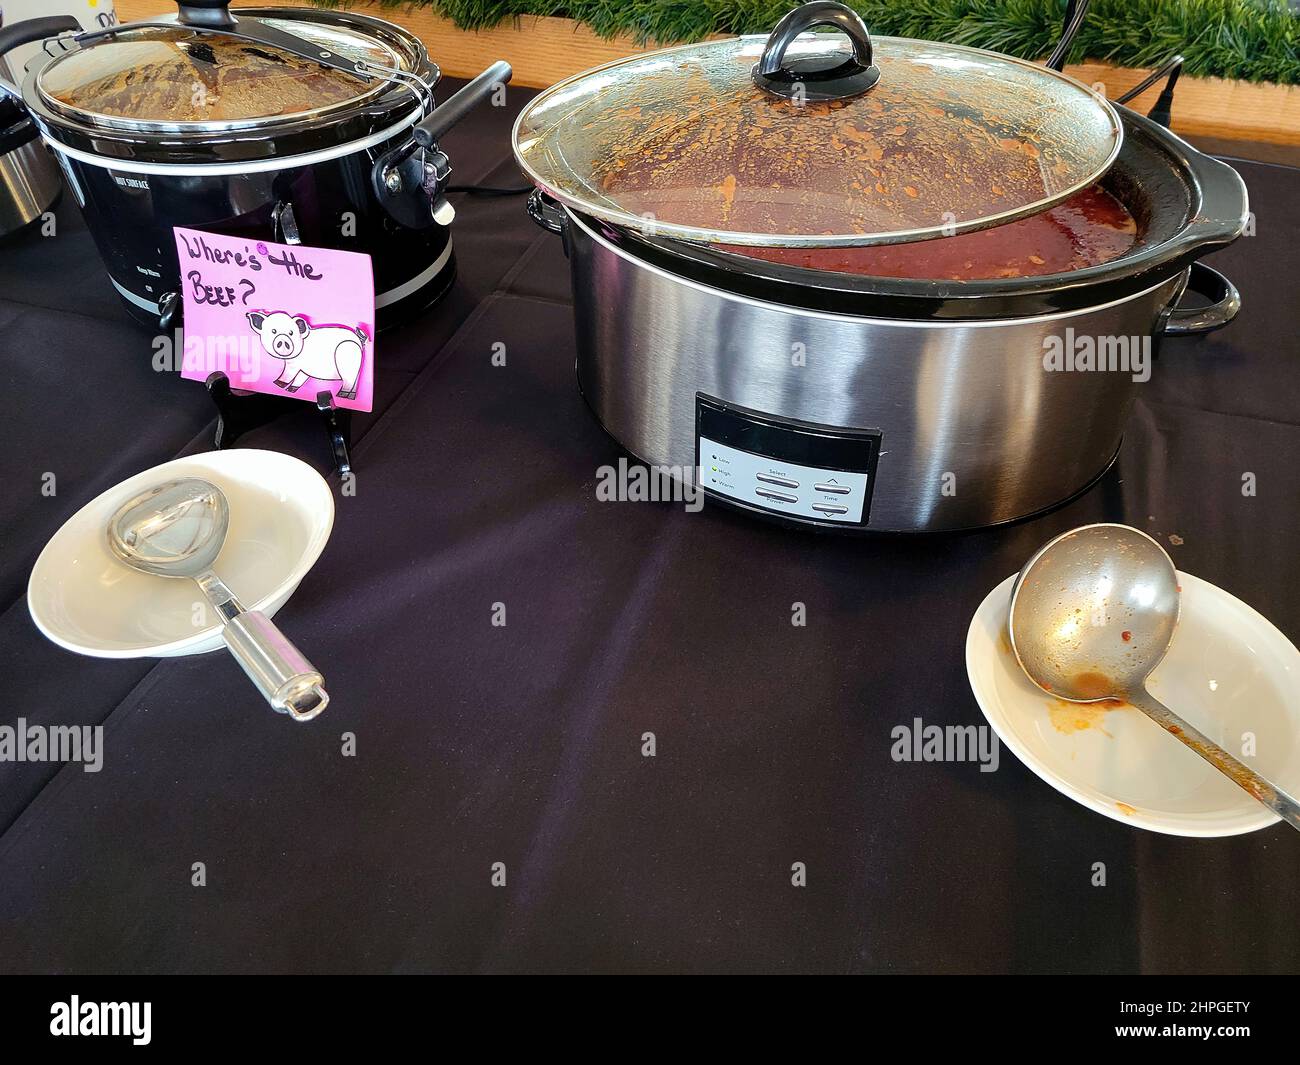 Crockpots on a tablecloth in a chili cook-off contest Stock Photo